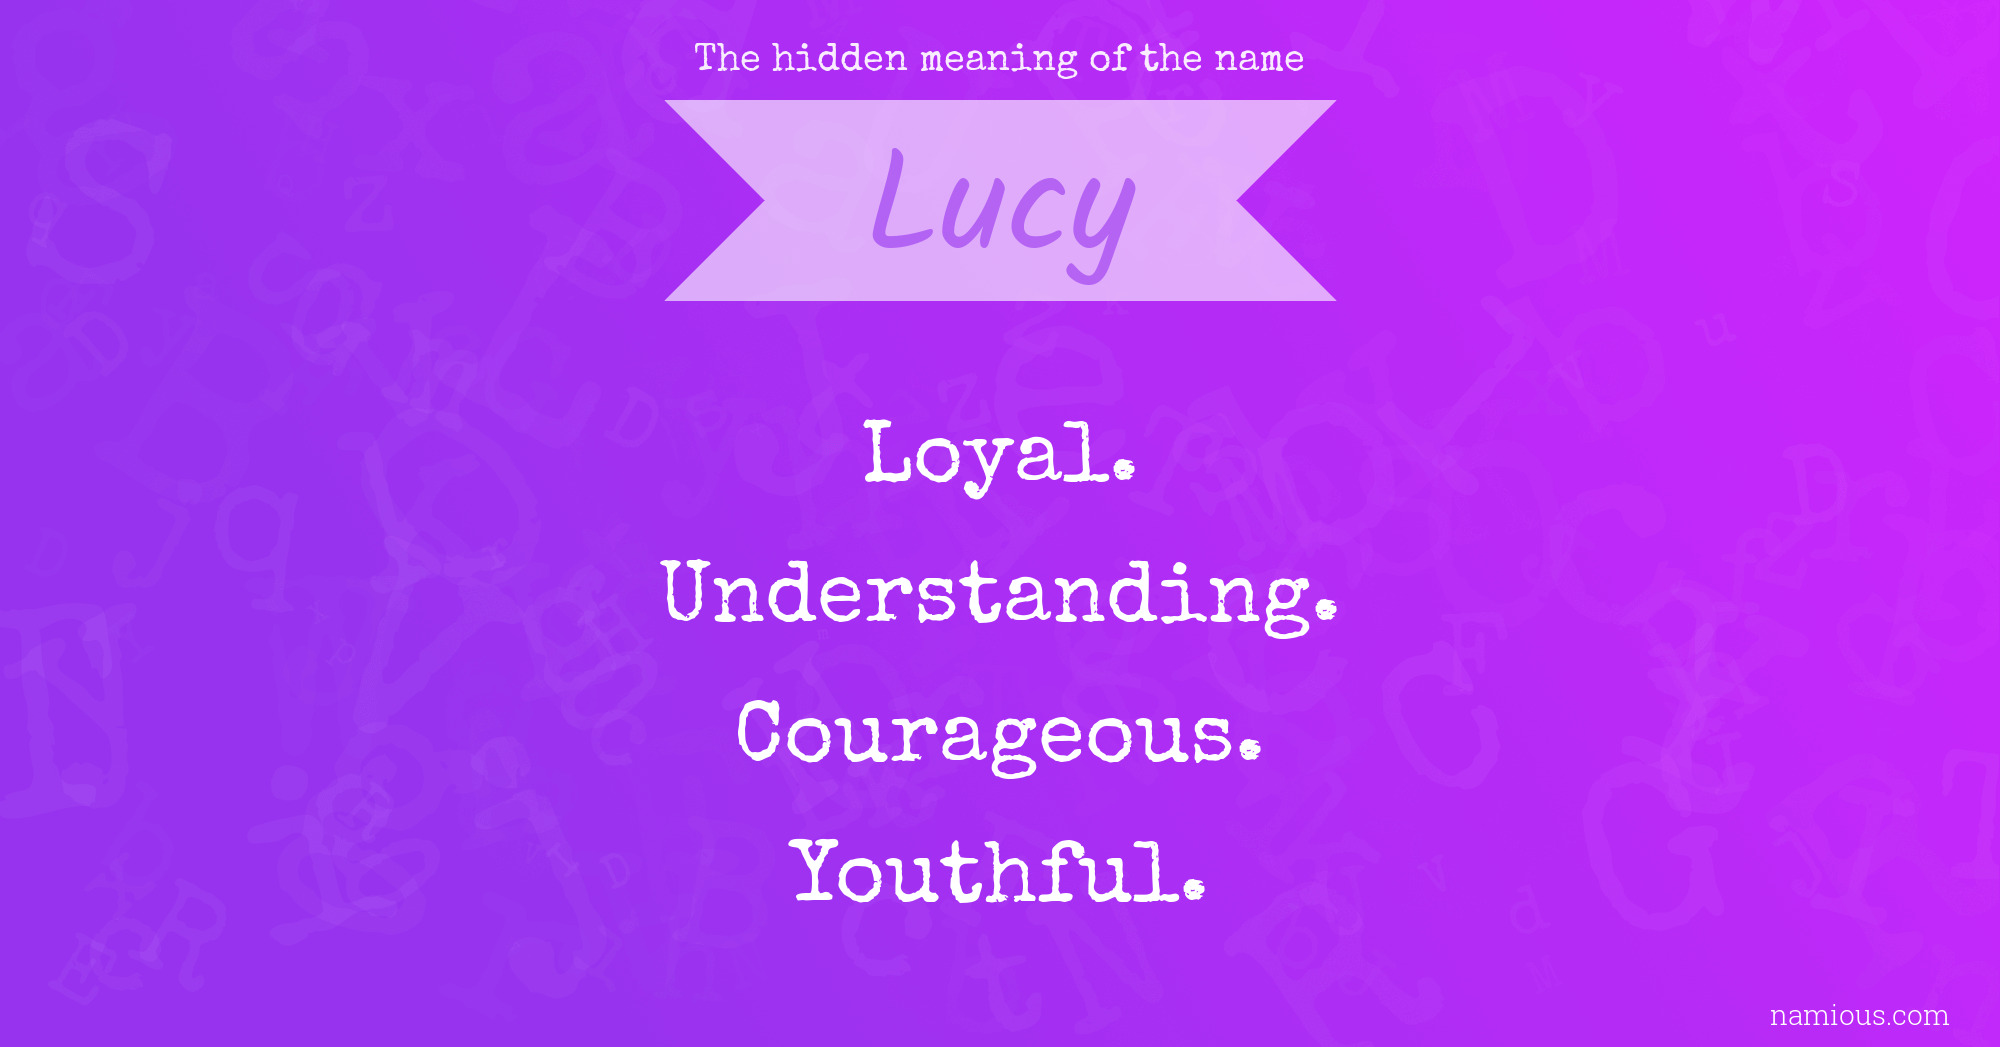 The hidden meaning of the name Lucy